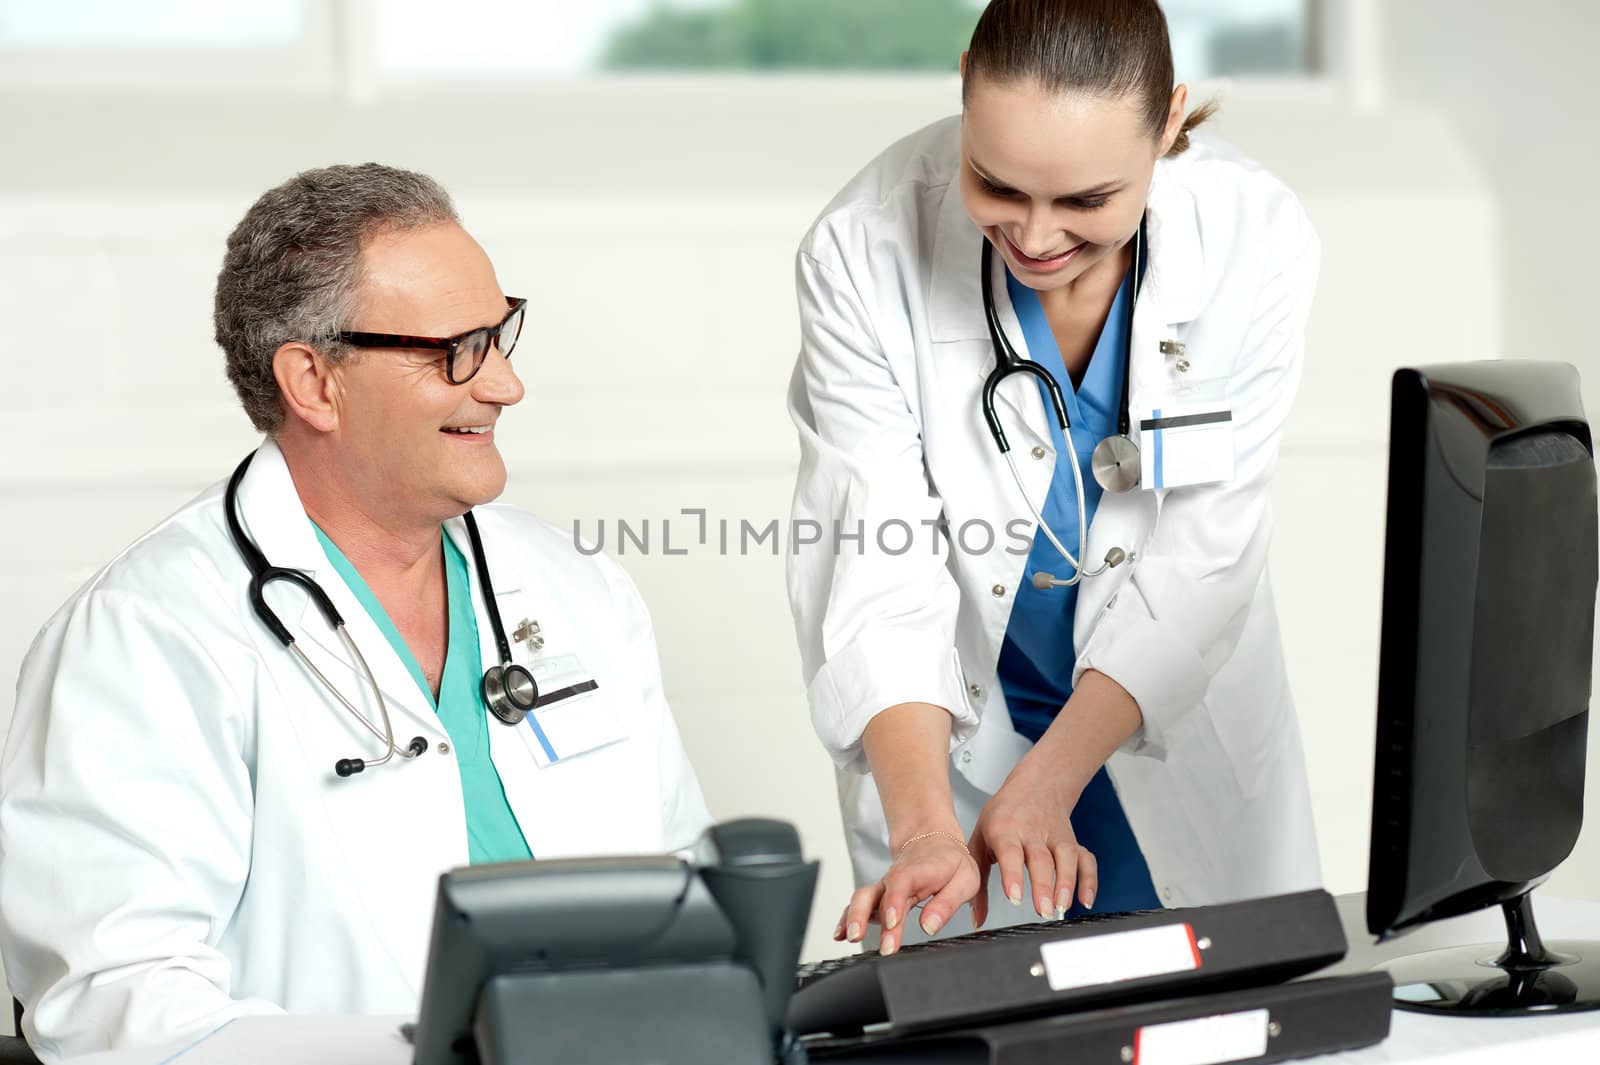 Smiling medical team working on computer in a hospital